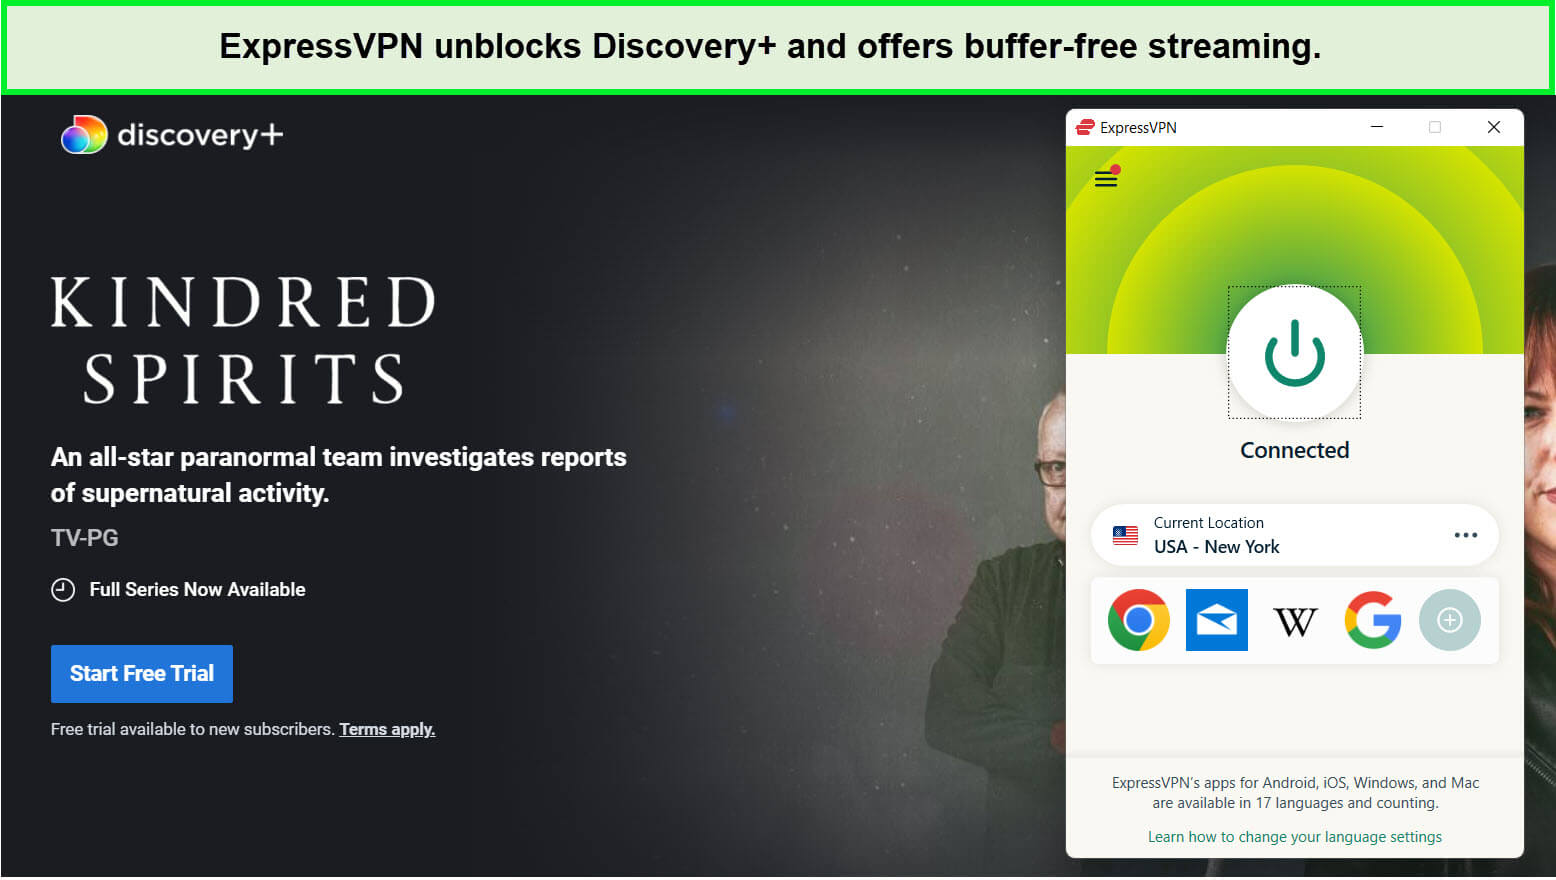 expressvpn-unblocks-us-discovery-plus-in-france